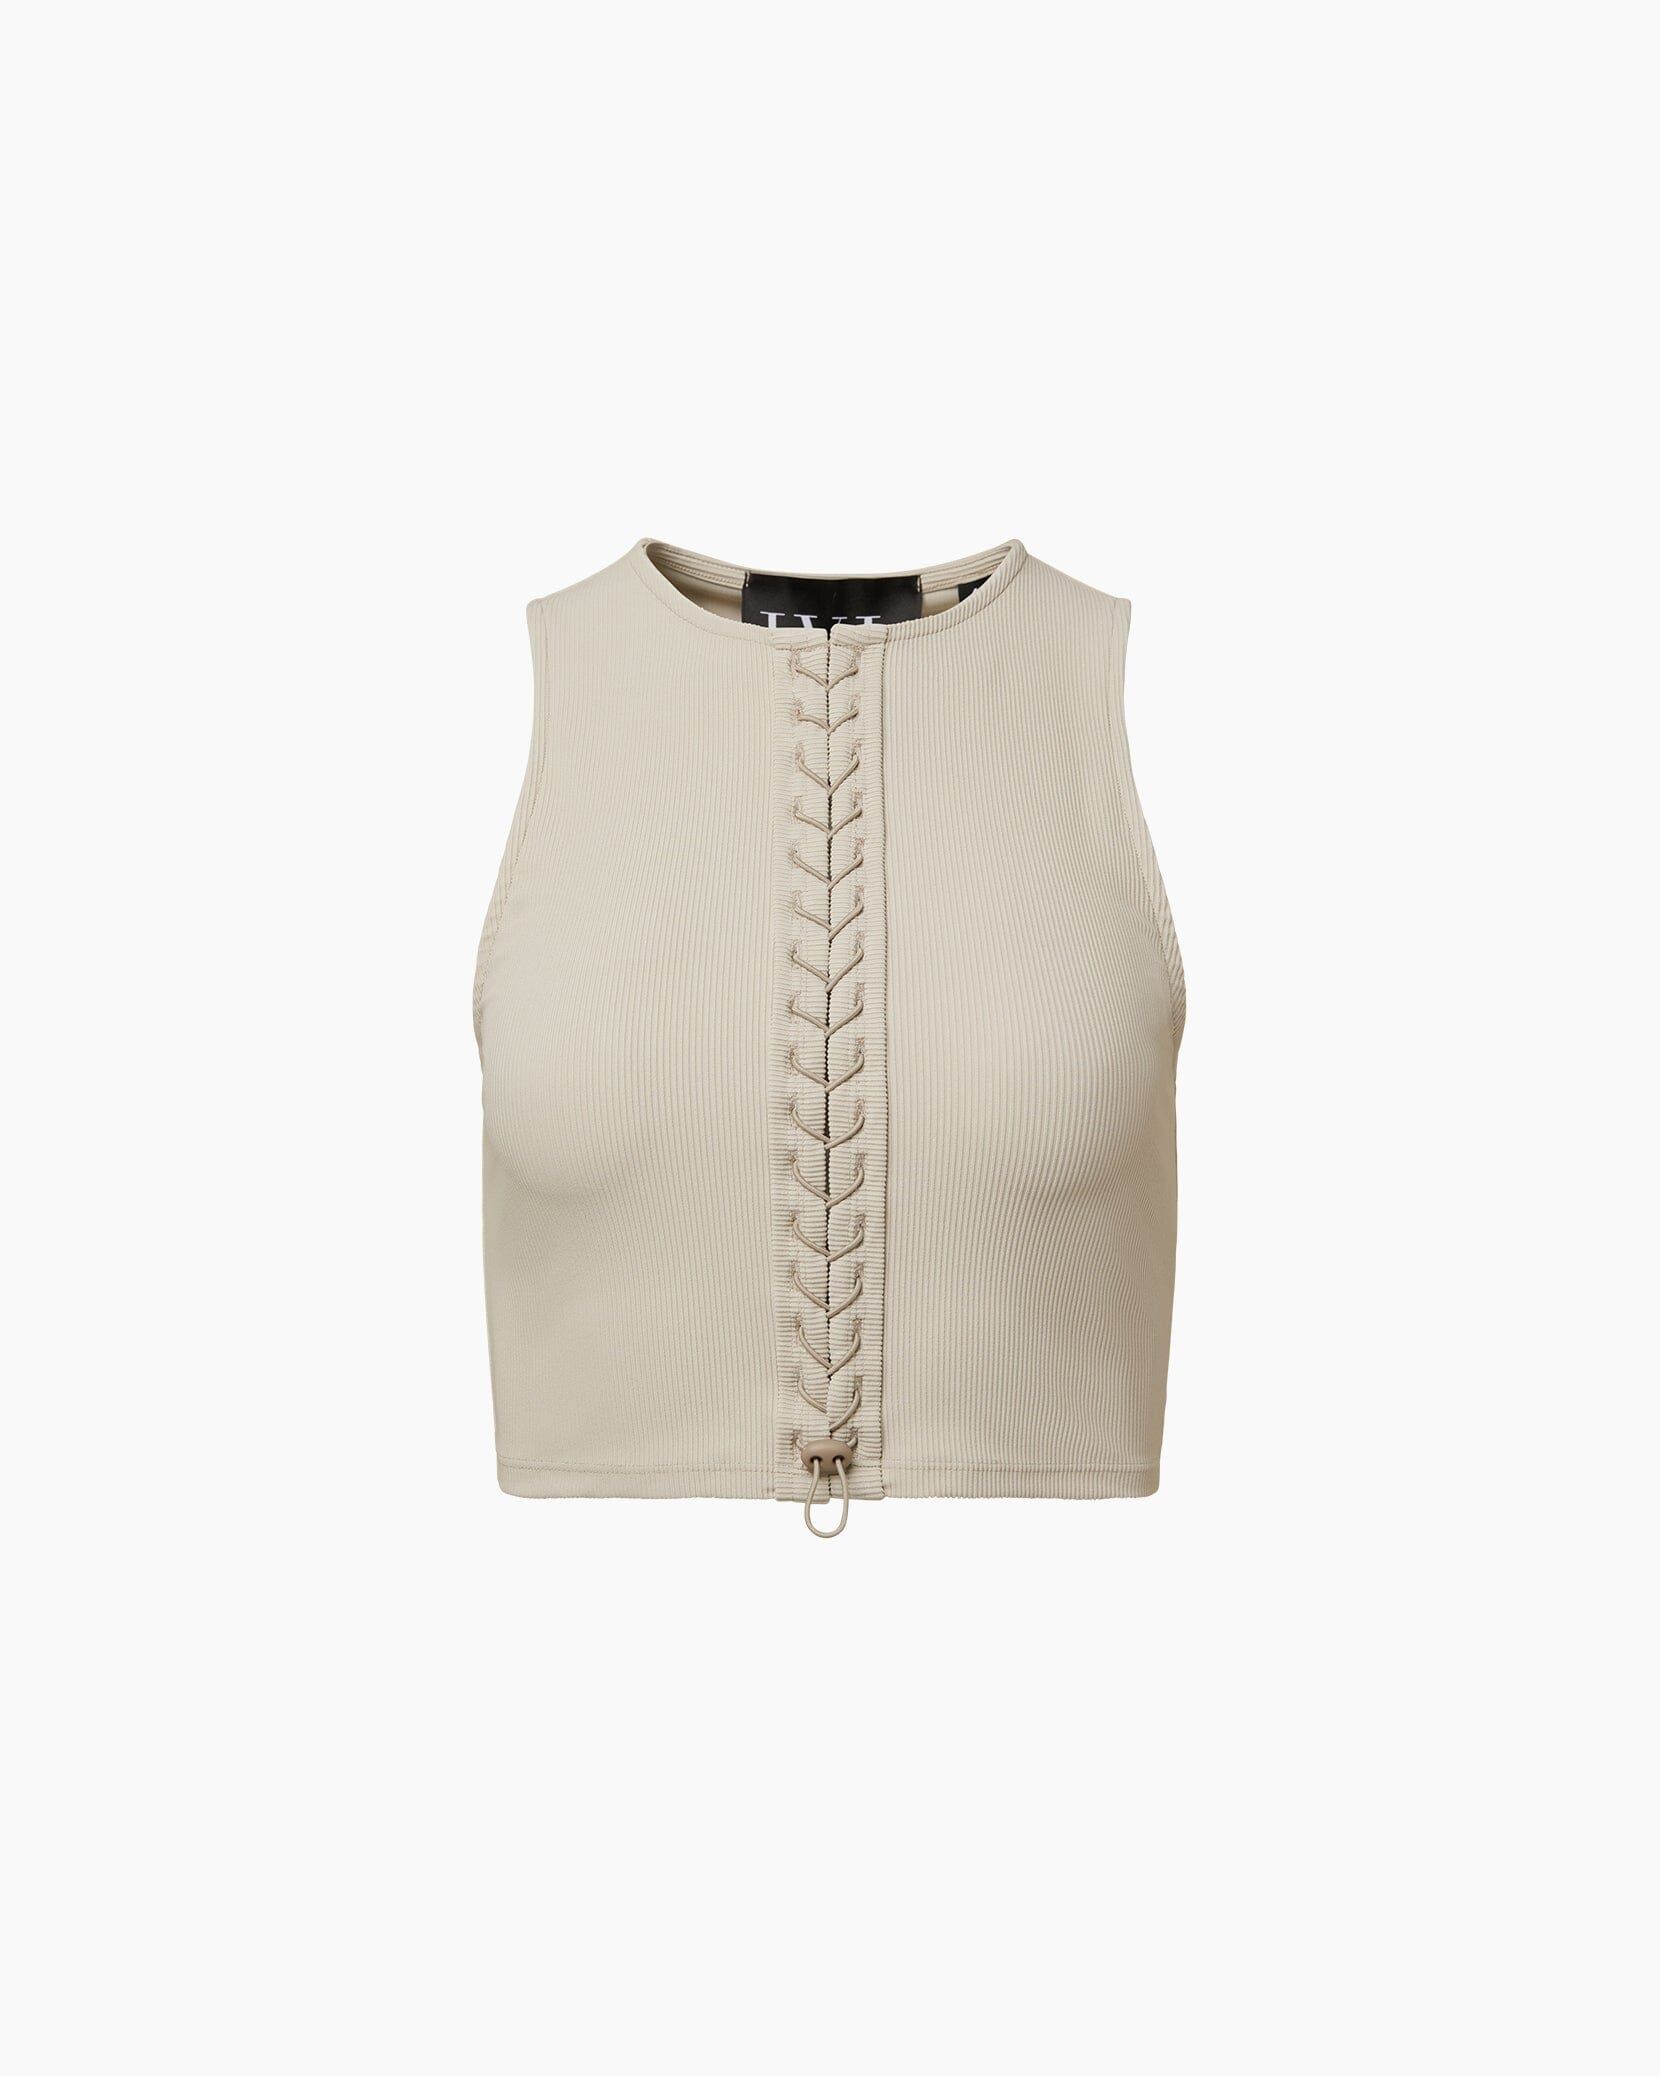 Lace Up Tank | IVL COLLECTIVE